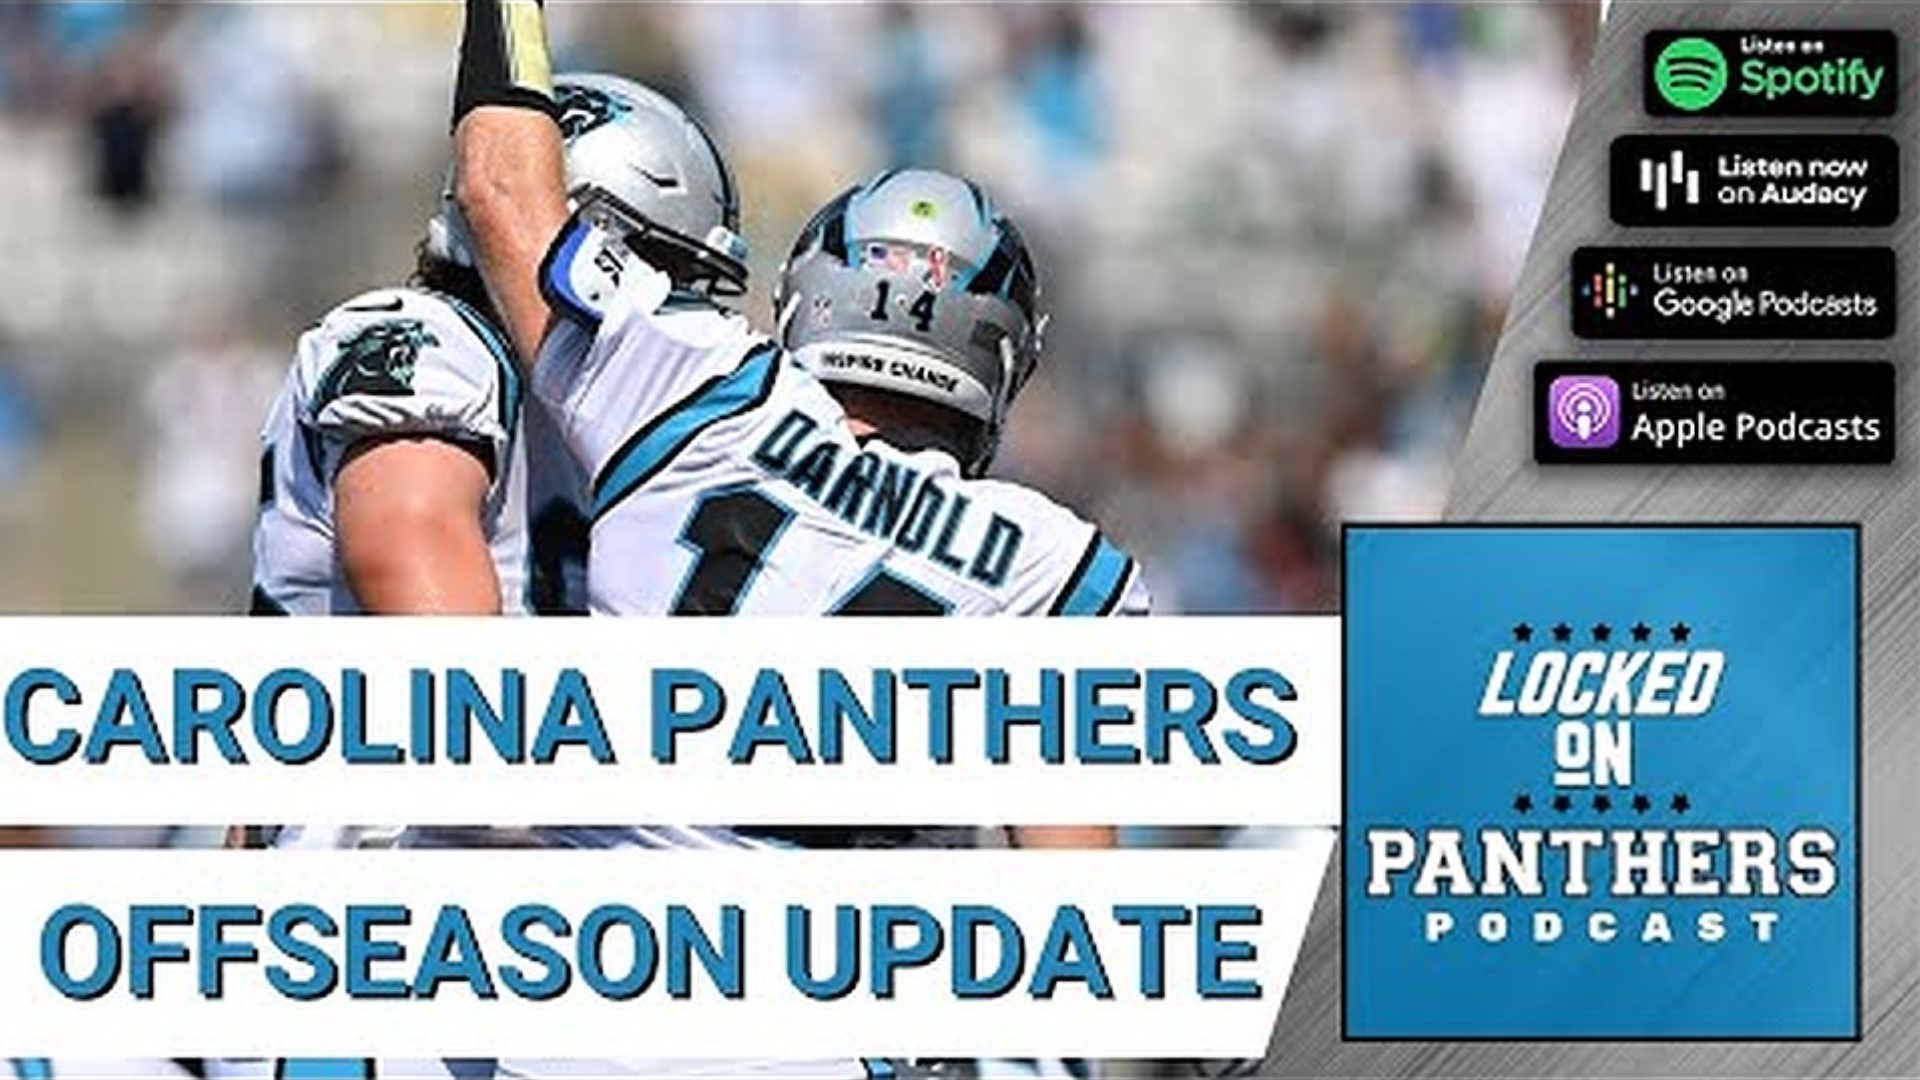 The Carolina Panthers continue a busy offseason as voluntary workouts continue at the training facility located next to Bank of America Stadium in Uptown Charlotte.